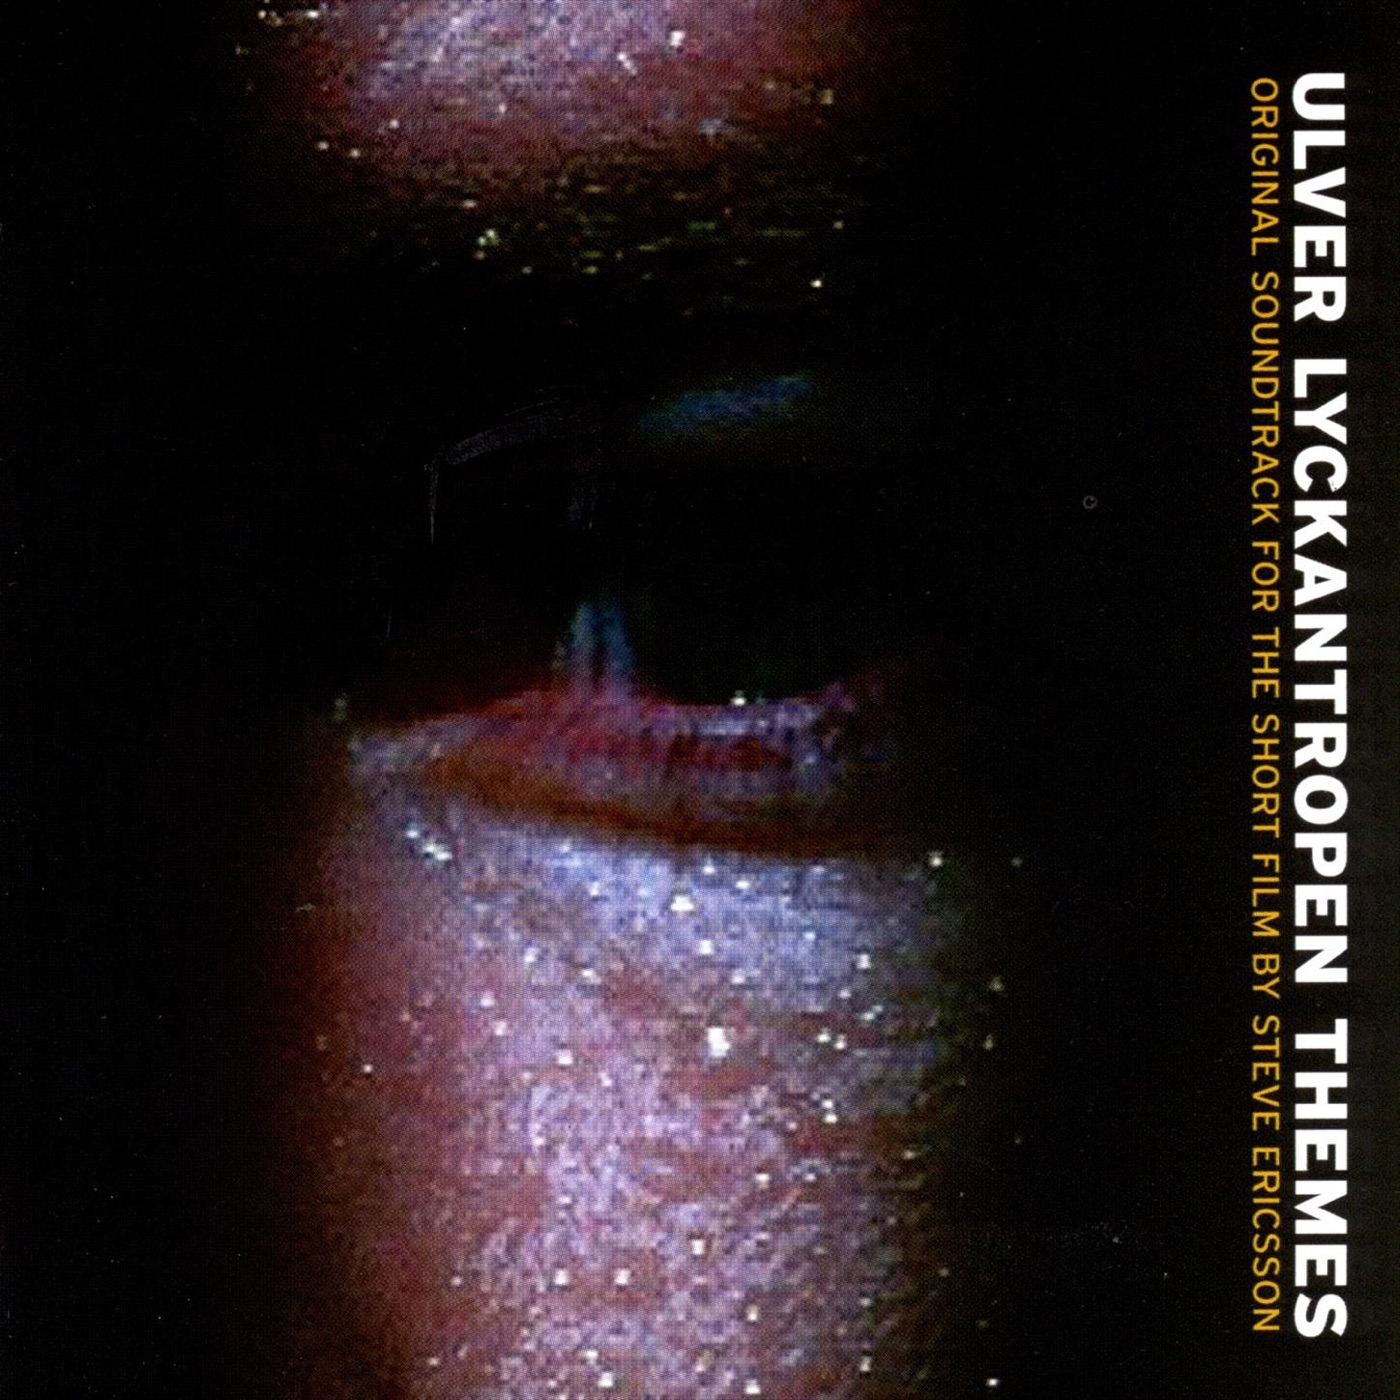 Lyckantropen Themes by Ulver